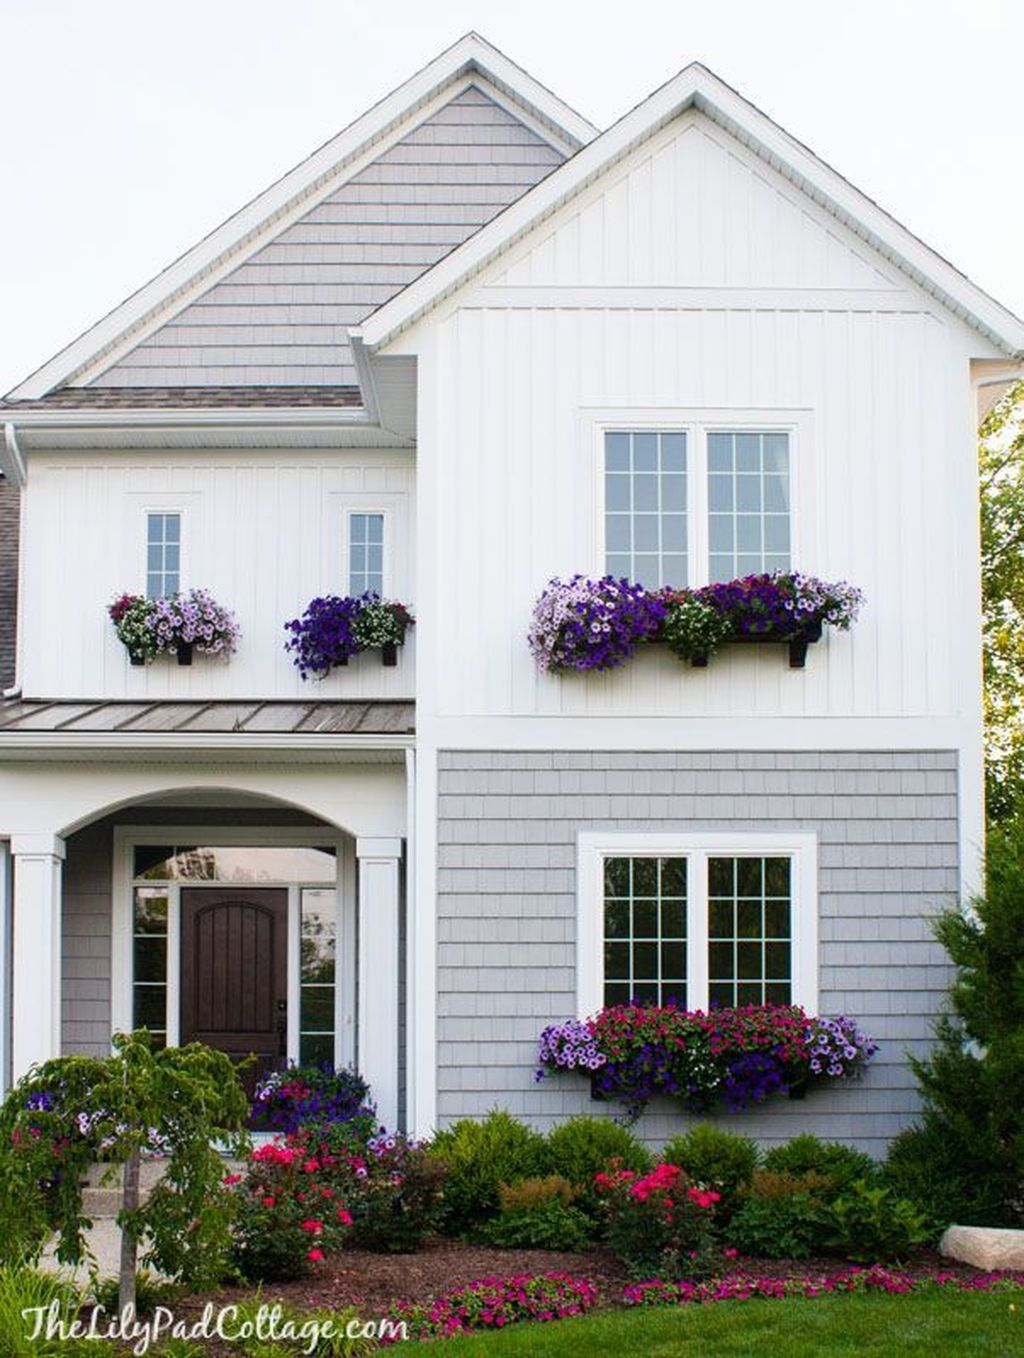 Amazing Windows Flower Boxes Design Ideas Must See38